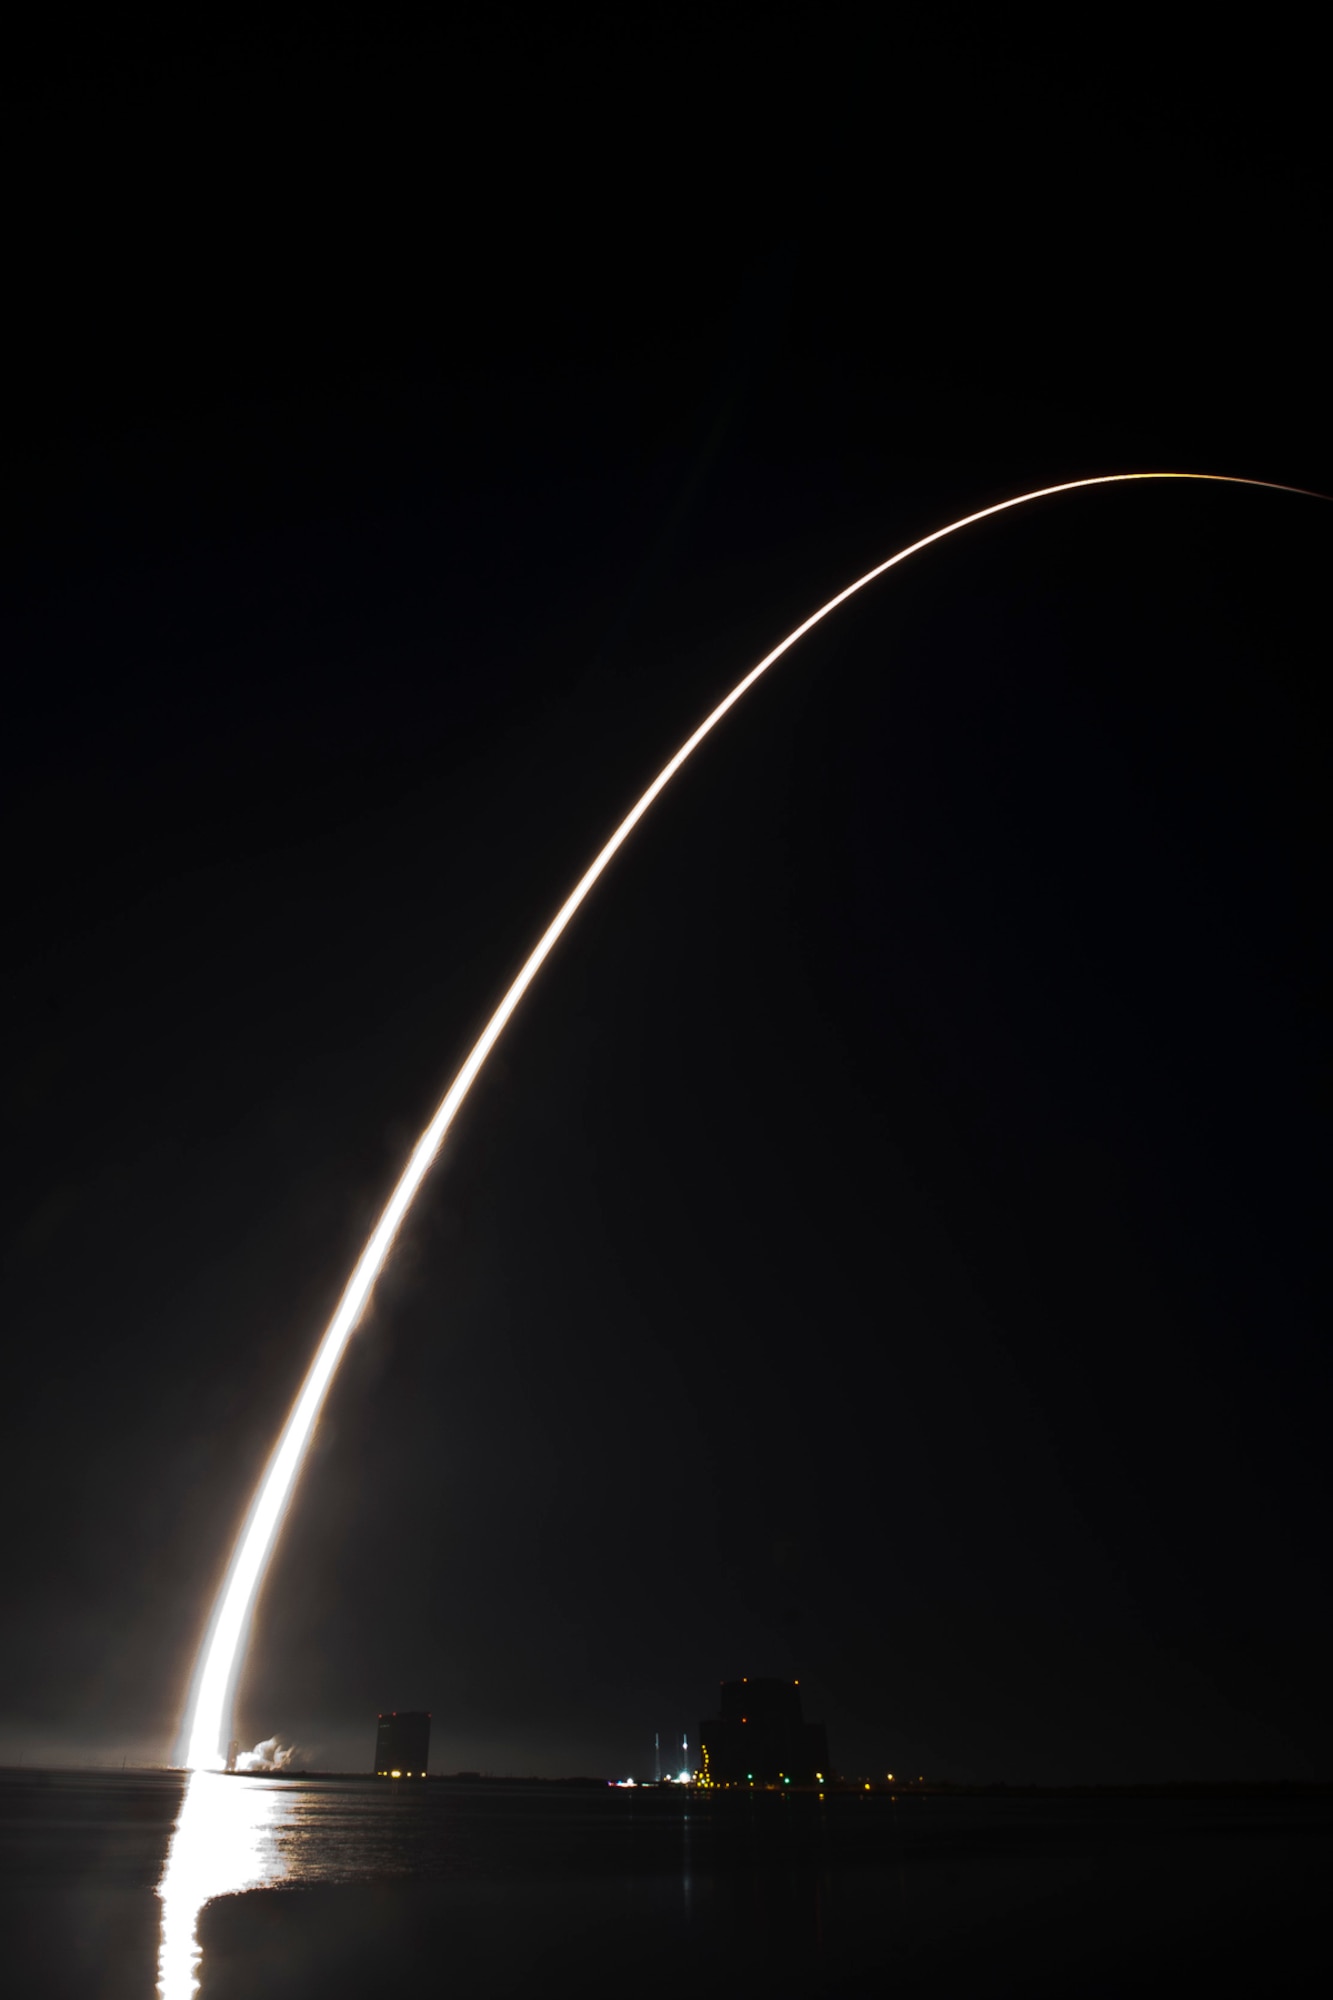 The Department of Defense’s Space Test Program Satellite 6, or STPSat-6, is captured via long exposure after it blasted off from Cape Canaveral Space Force Station's Space Launch Complex-41 at 5:19 a.m., Dec. 7, 2021 aboard an Atlas V rocket. The satellite will be used to advance warfighting capabilities in the areas of nuclear detonation detection, space domain awareness, and communication.  (Photo courtesy of Carleton Bailie, SpaceLine News)